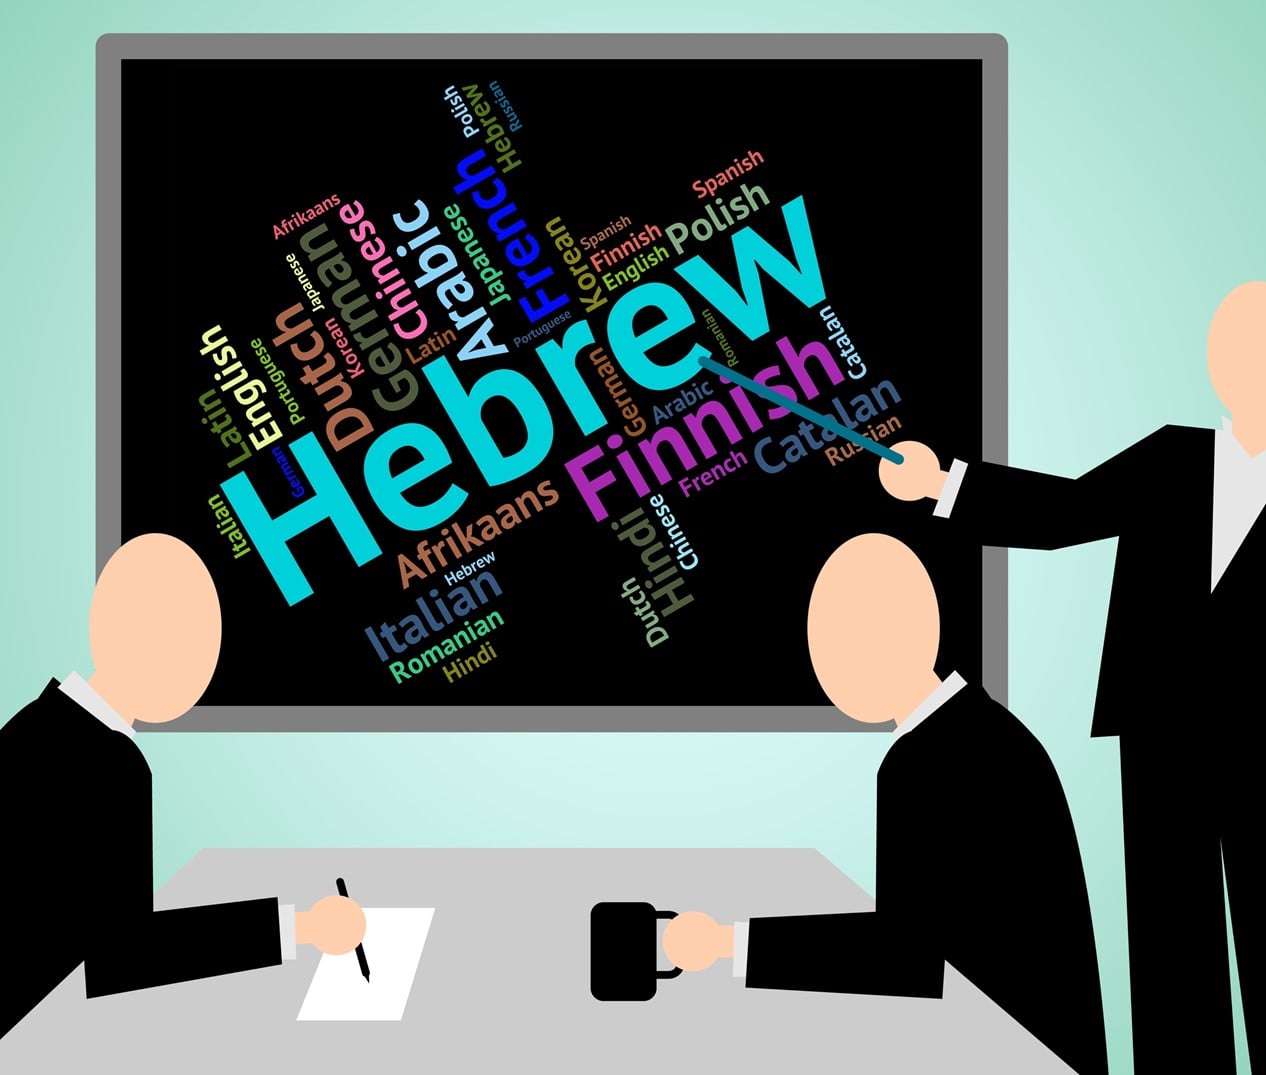 Man pointing to Hebrew on a blackboard